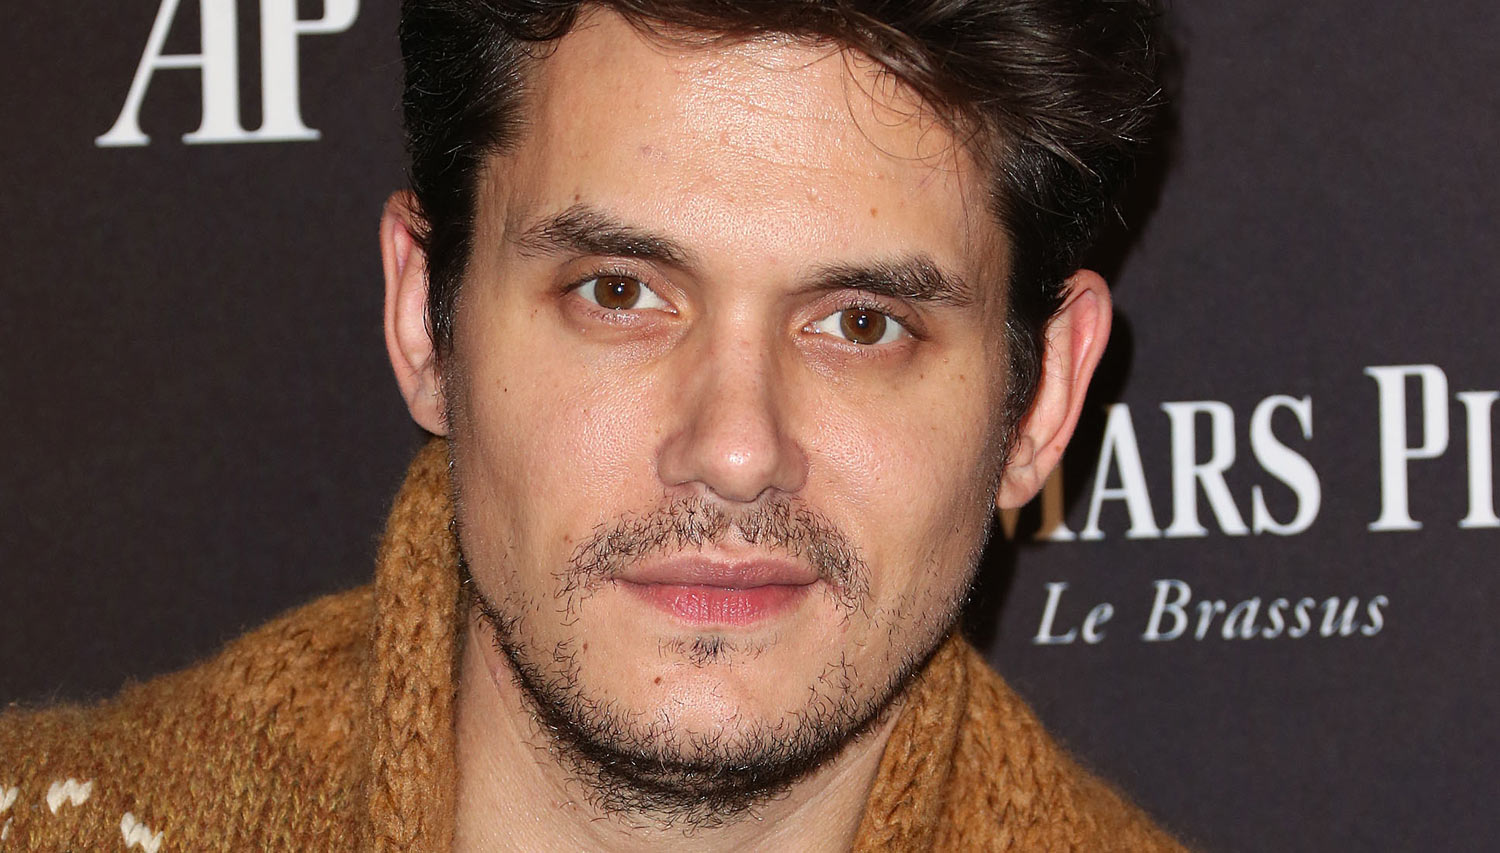 John Mayer Sheds Tears While Watching ‘This Is Us,’ Mandy Moore Responds.